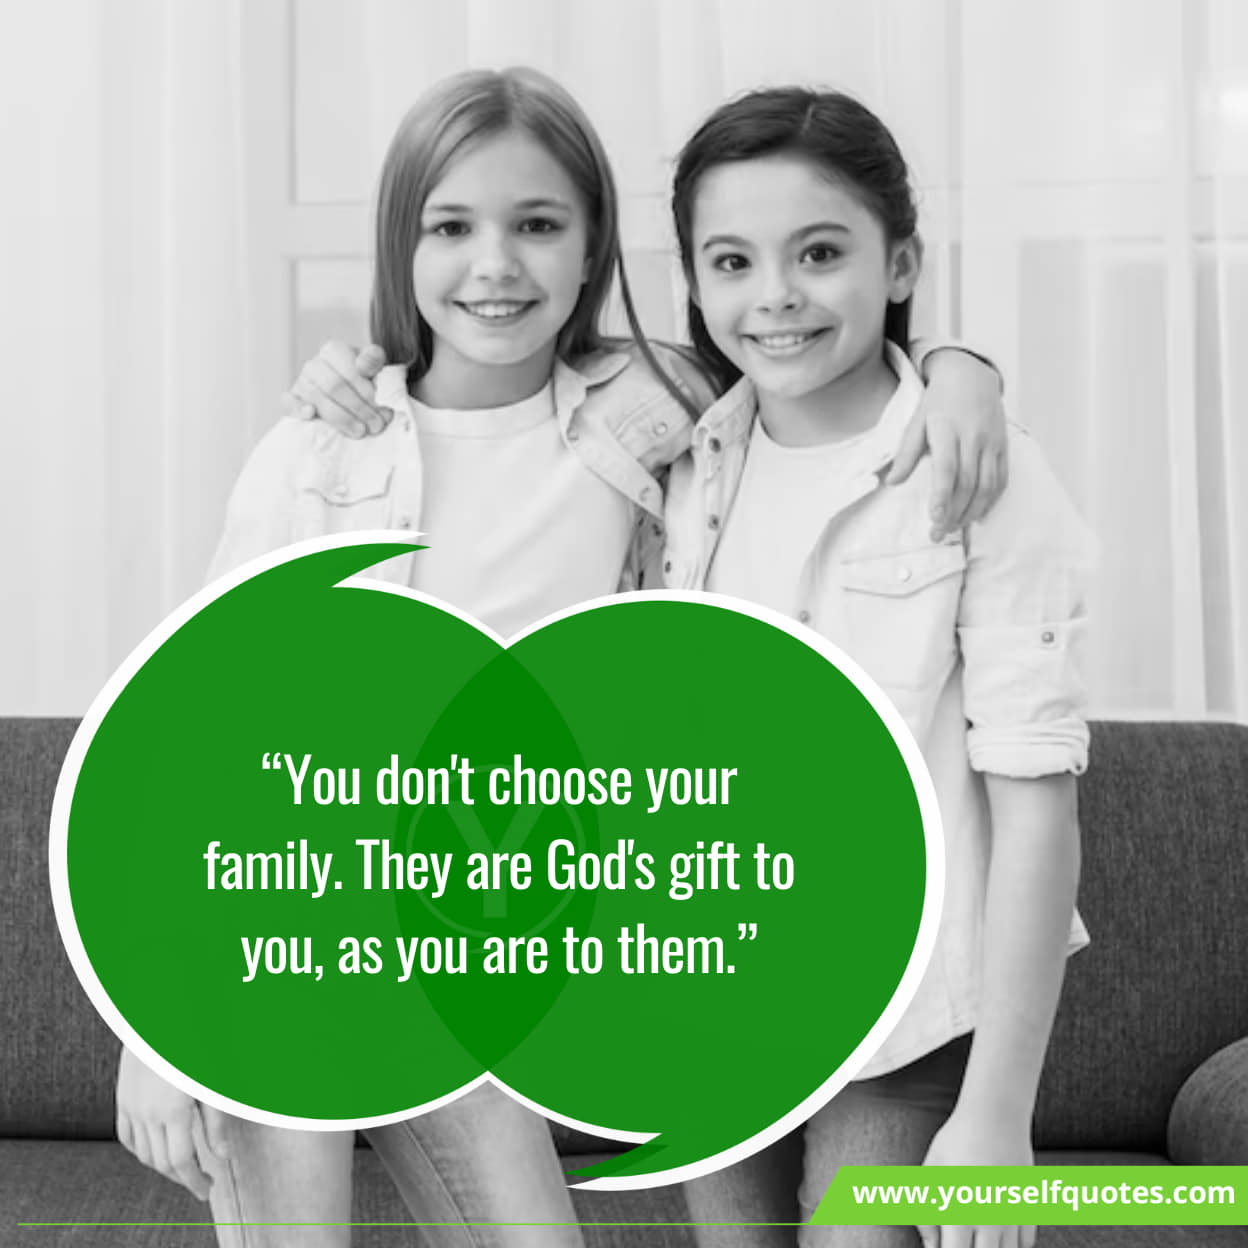 Quotes about the Bond of Siblings on National Siblings Day